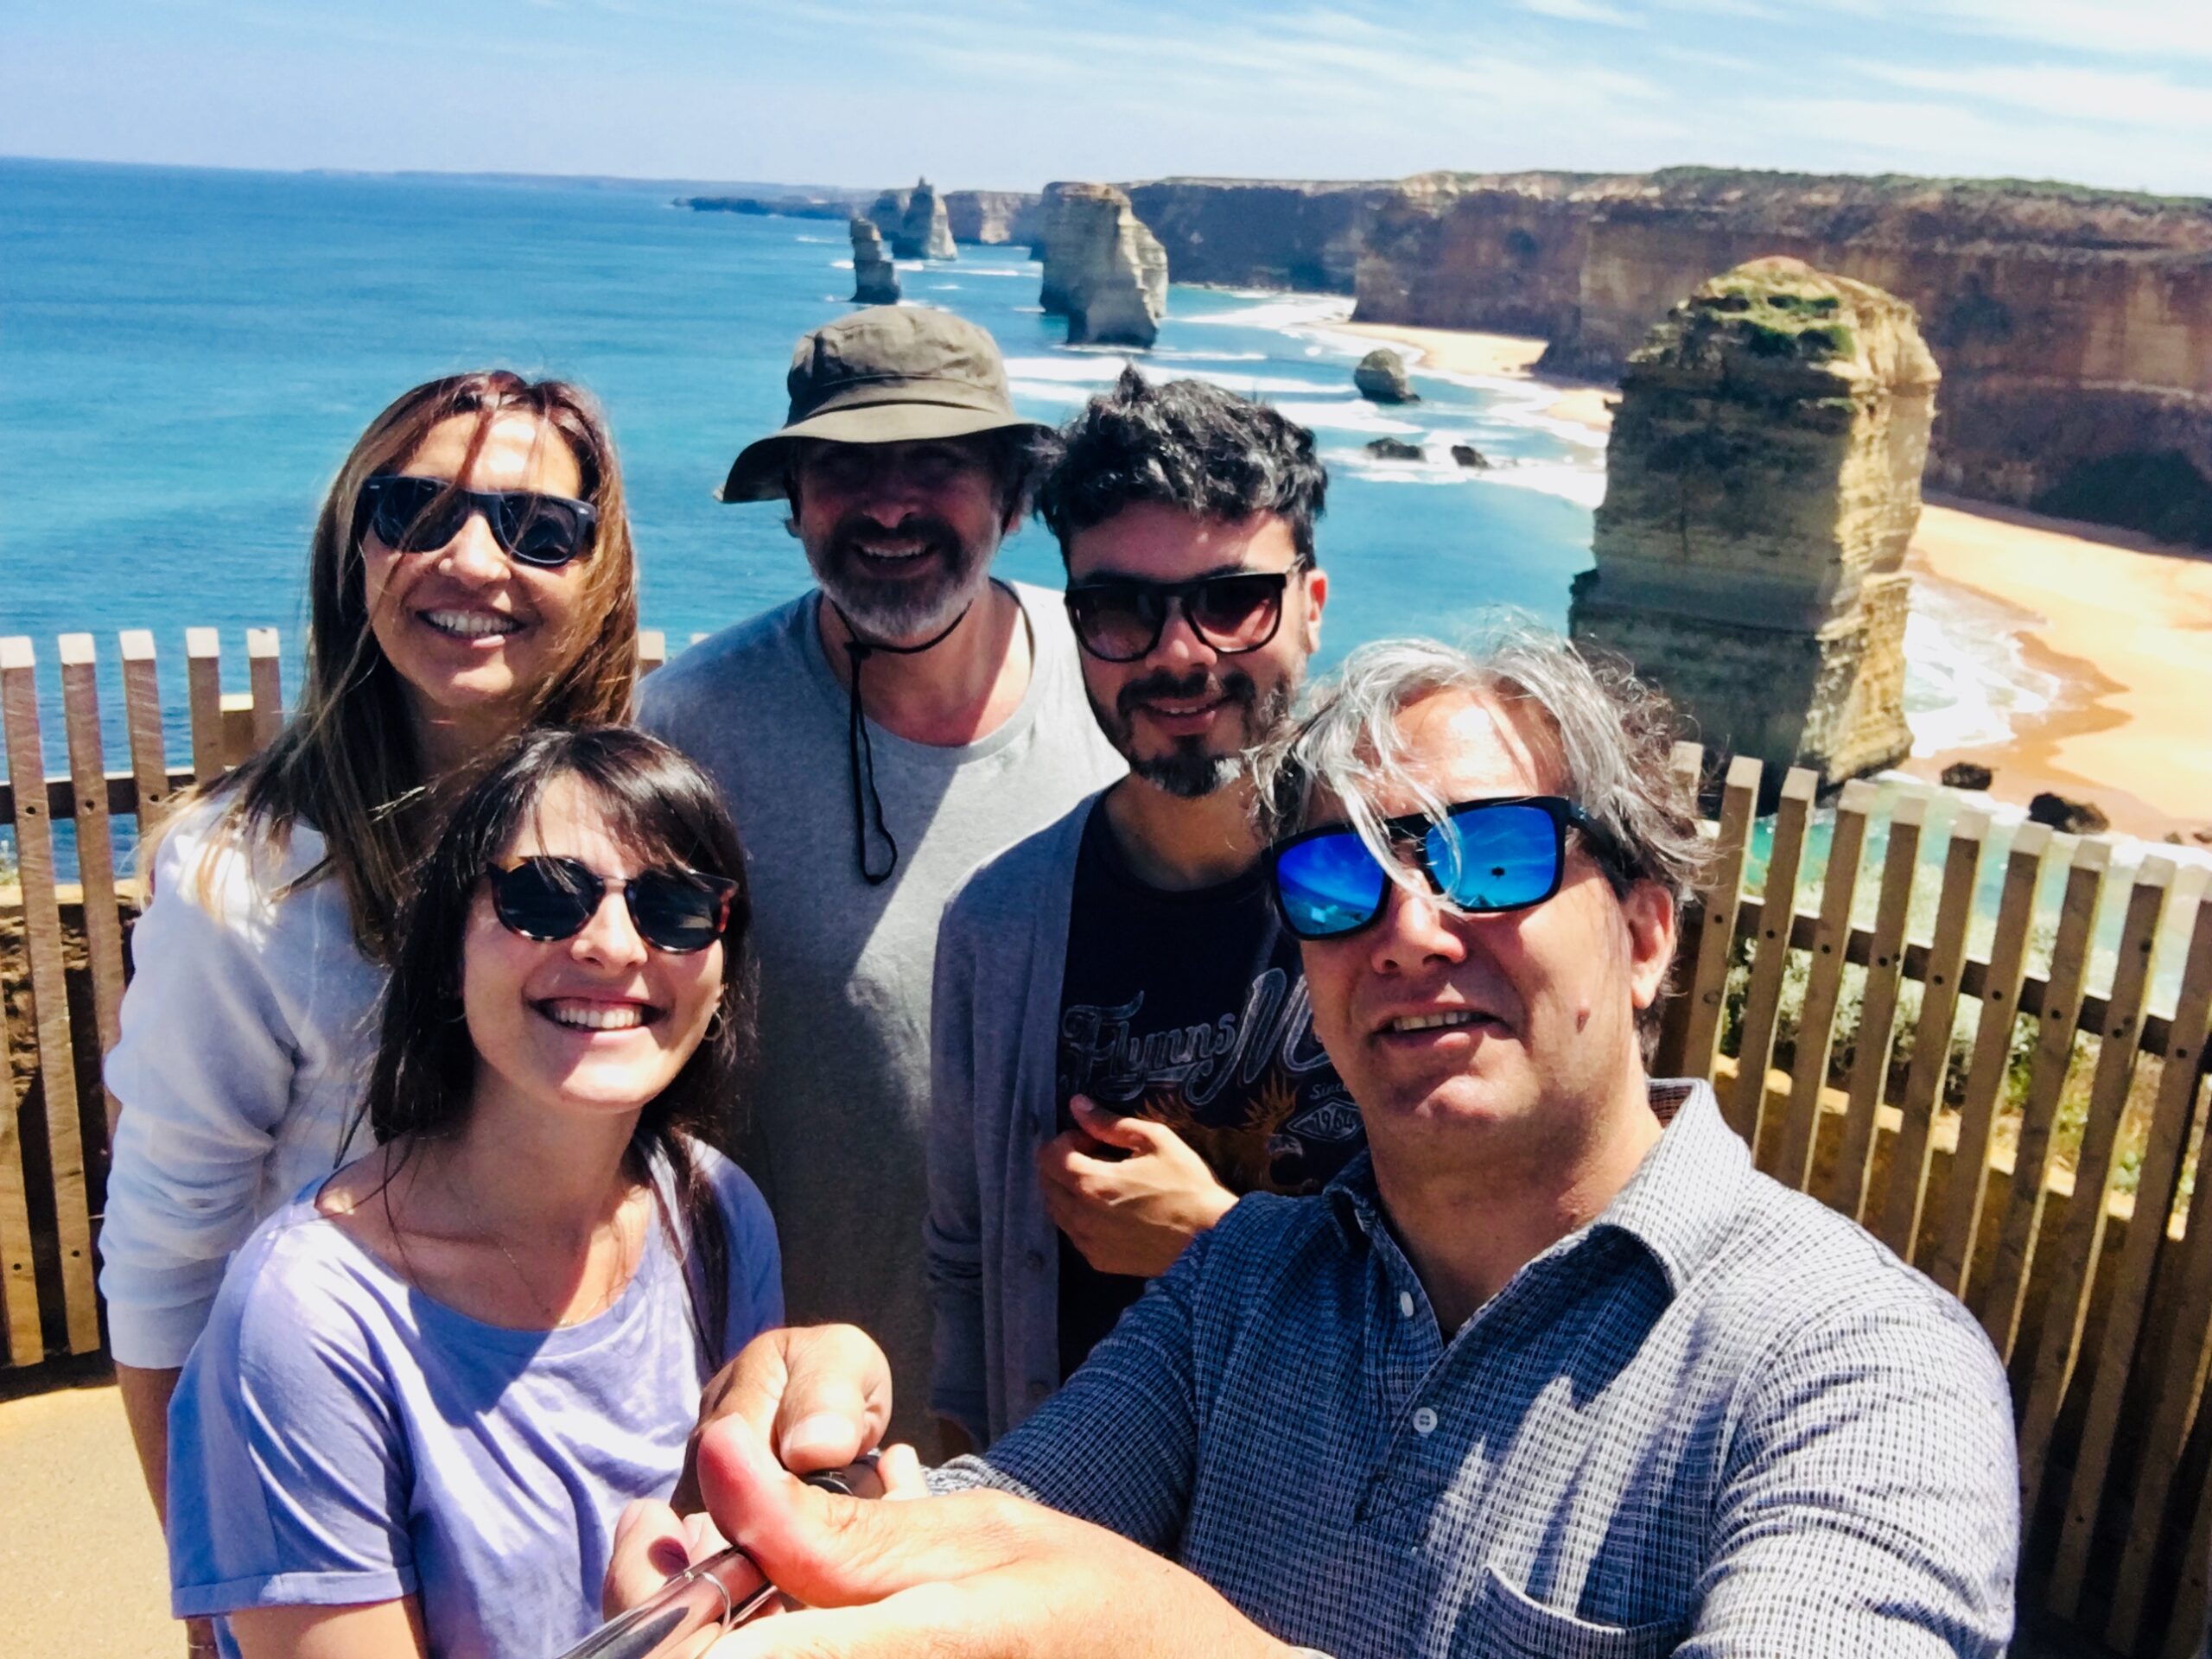 The Great Ocean Road and 12 Apostles Private Tour